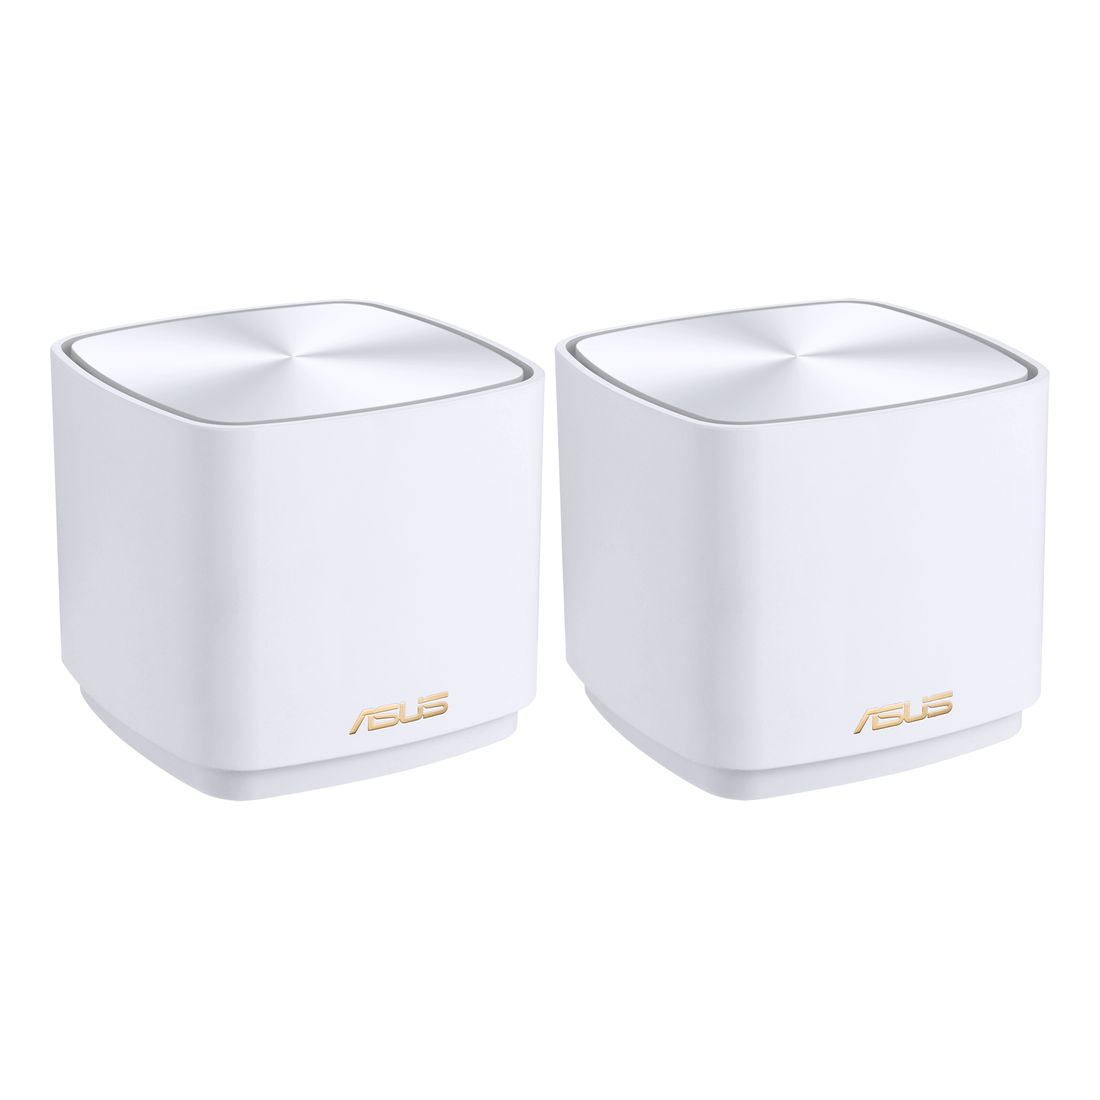 Asus ZenWiFi XD5 AX3000 WiFi 6 Router - White (Pack of 2)